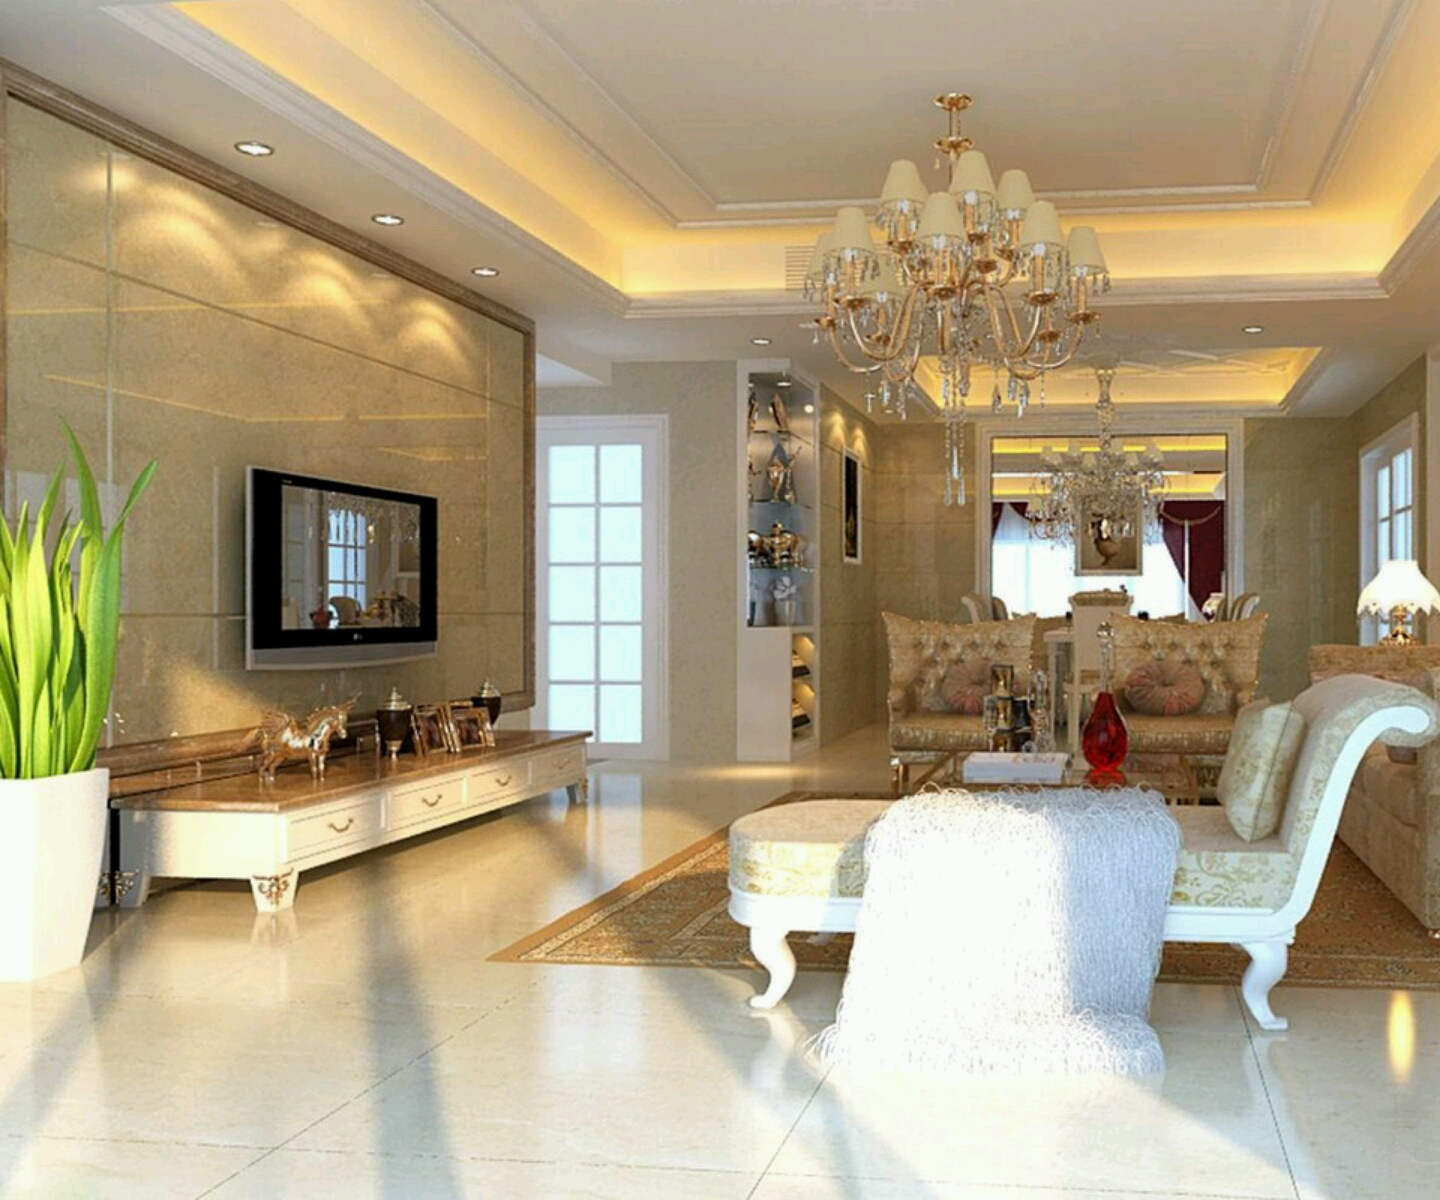 New home designs latest.: Luxury homes interior decoration living room 